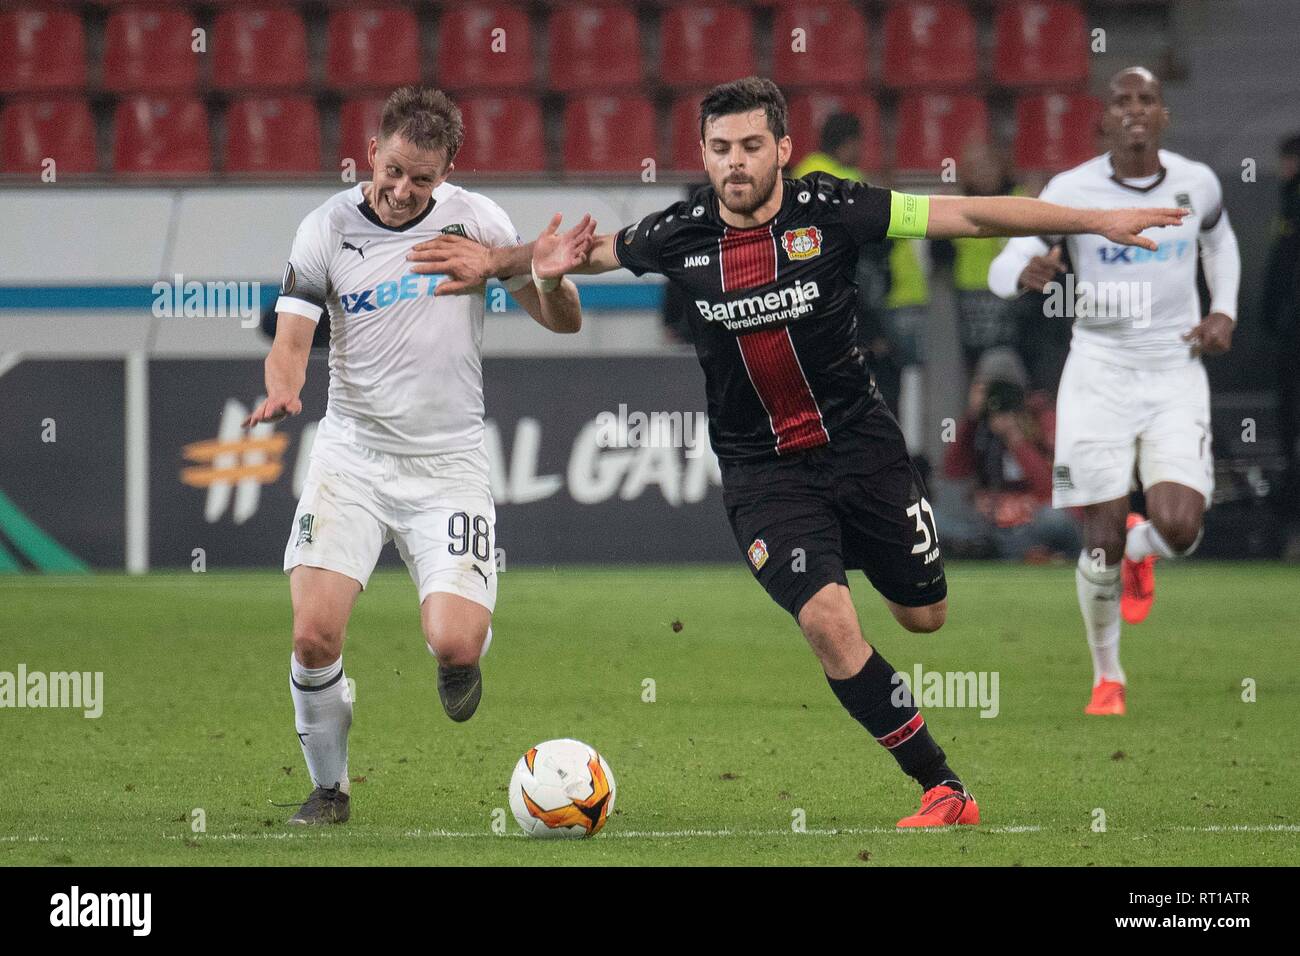 Leverkusen, Deutschland. 21st Feb, 2019. Kevin VOLLAND (LEV, r.) Tries to keep away from dueling Sergey PETROV (FK Krasnodar); Soccer Europa League, Zwischenrunde, Rückspiel Bayer 04 Leverkusen (LEV) - FK Krasnodar (FKK) 1: 1, Leverkusen is eliminated on 21/02/2019 in Leverkusen/Germany. UEFA regulations prohibit any use of images as image sequences and/or quasi-video | usage worldwide Credit: dpa/Alamy Live News Stock Photo